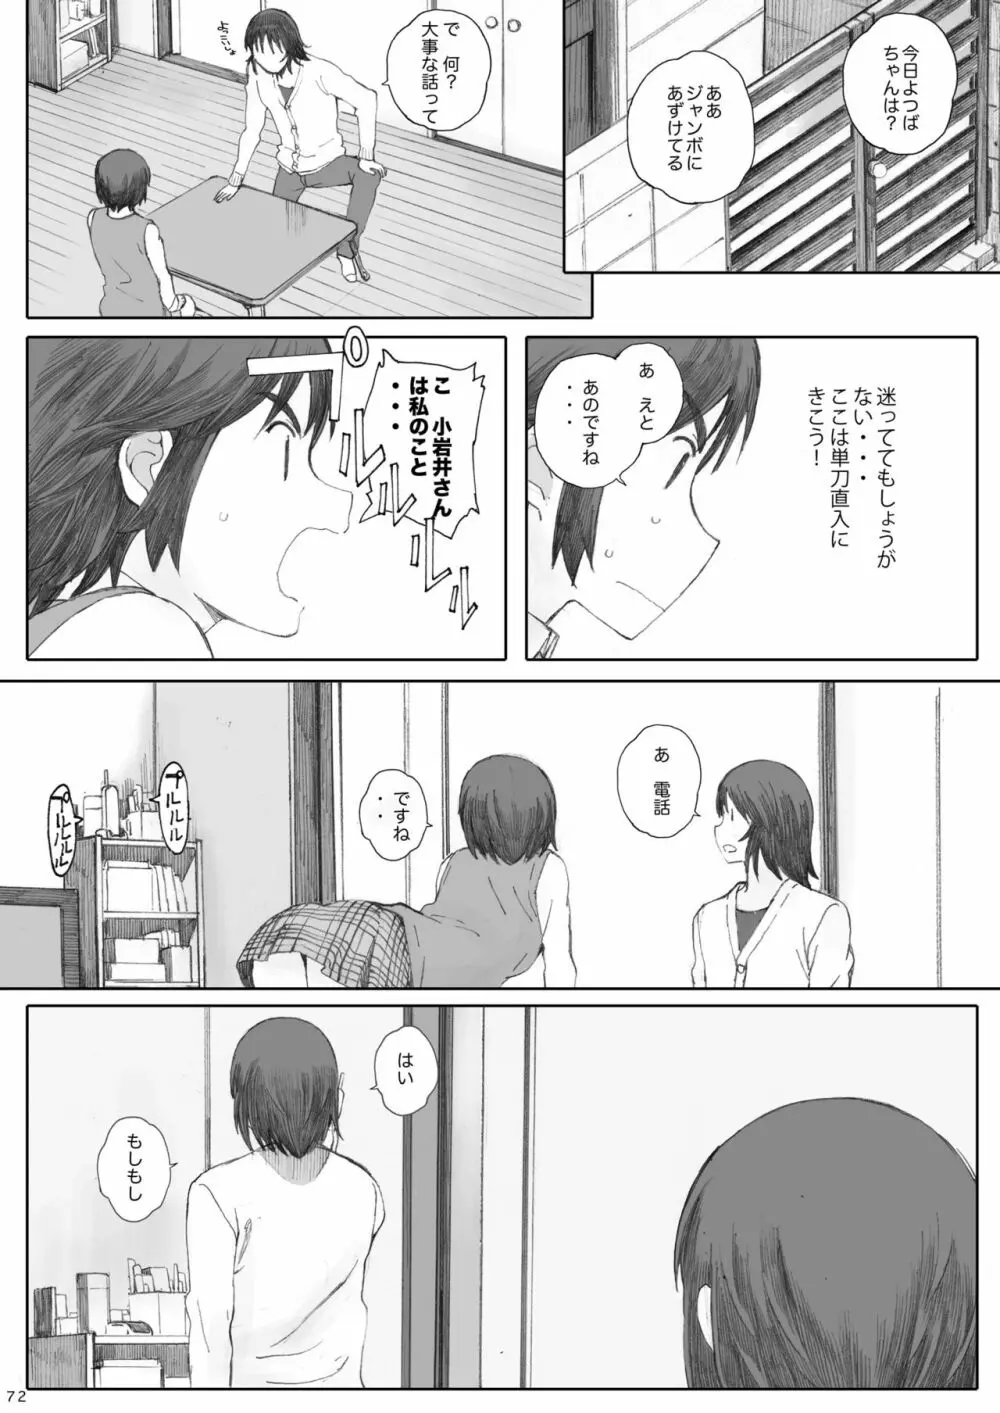 clover 総集編 - page72